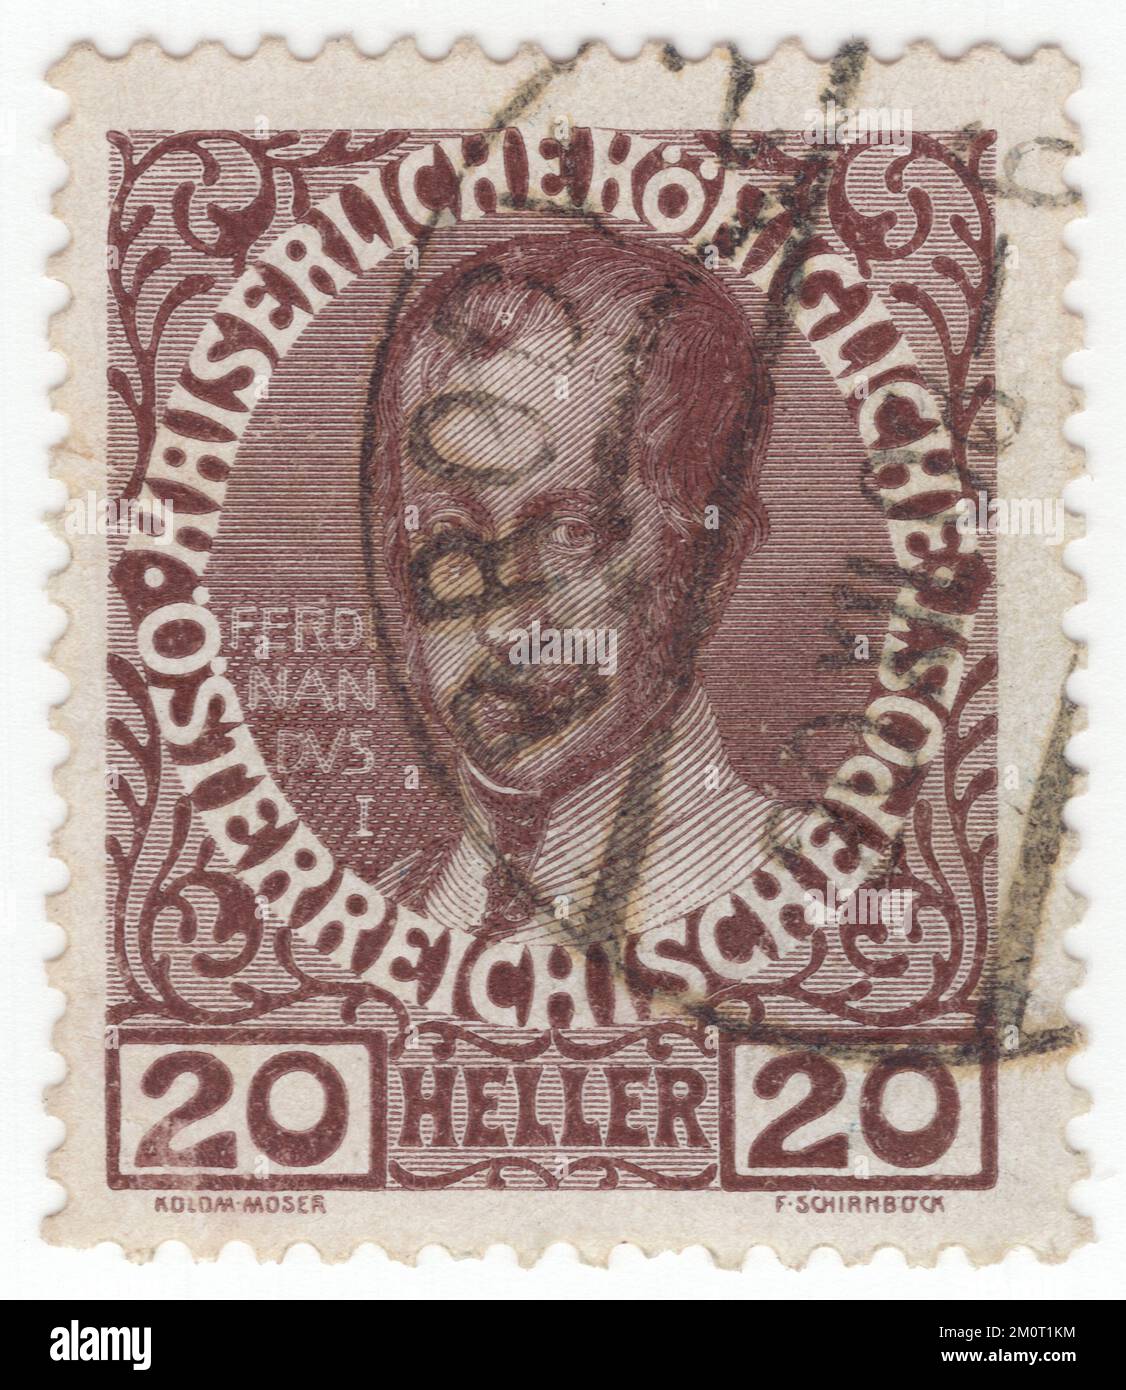 AUSTRIA - 1913: An 20 heller chocolate postage stamp depicting a portrait of Ferdinand I. Definitive set issued for the 60th year of the reign of Austrian Monarch Franz Josef, Emperor of Austria, King of Hungary, and the other states of the Habsburg monarchy. Ferdinand I was the Emperor of Austria from March 1835 until his abdication in December 1848. He was also King of Hungary, Croatia and Bohemia (as Ferdinand V), King of Lombardy–Venetia and holder of many other lesser titles. Due to his passive but well-intentioned character, he gained the sobriquet The Benign or The Benevolent Stock Photo